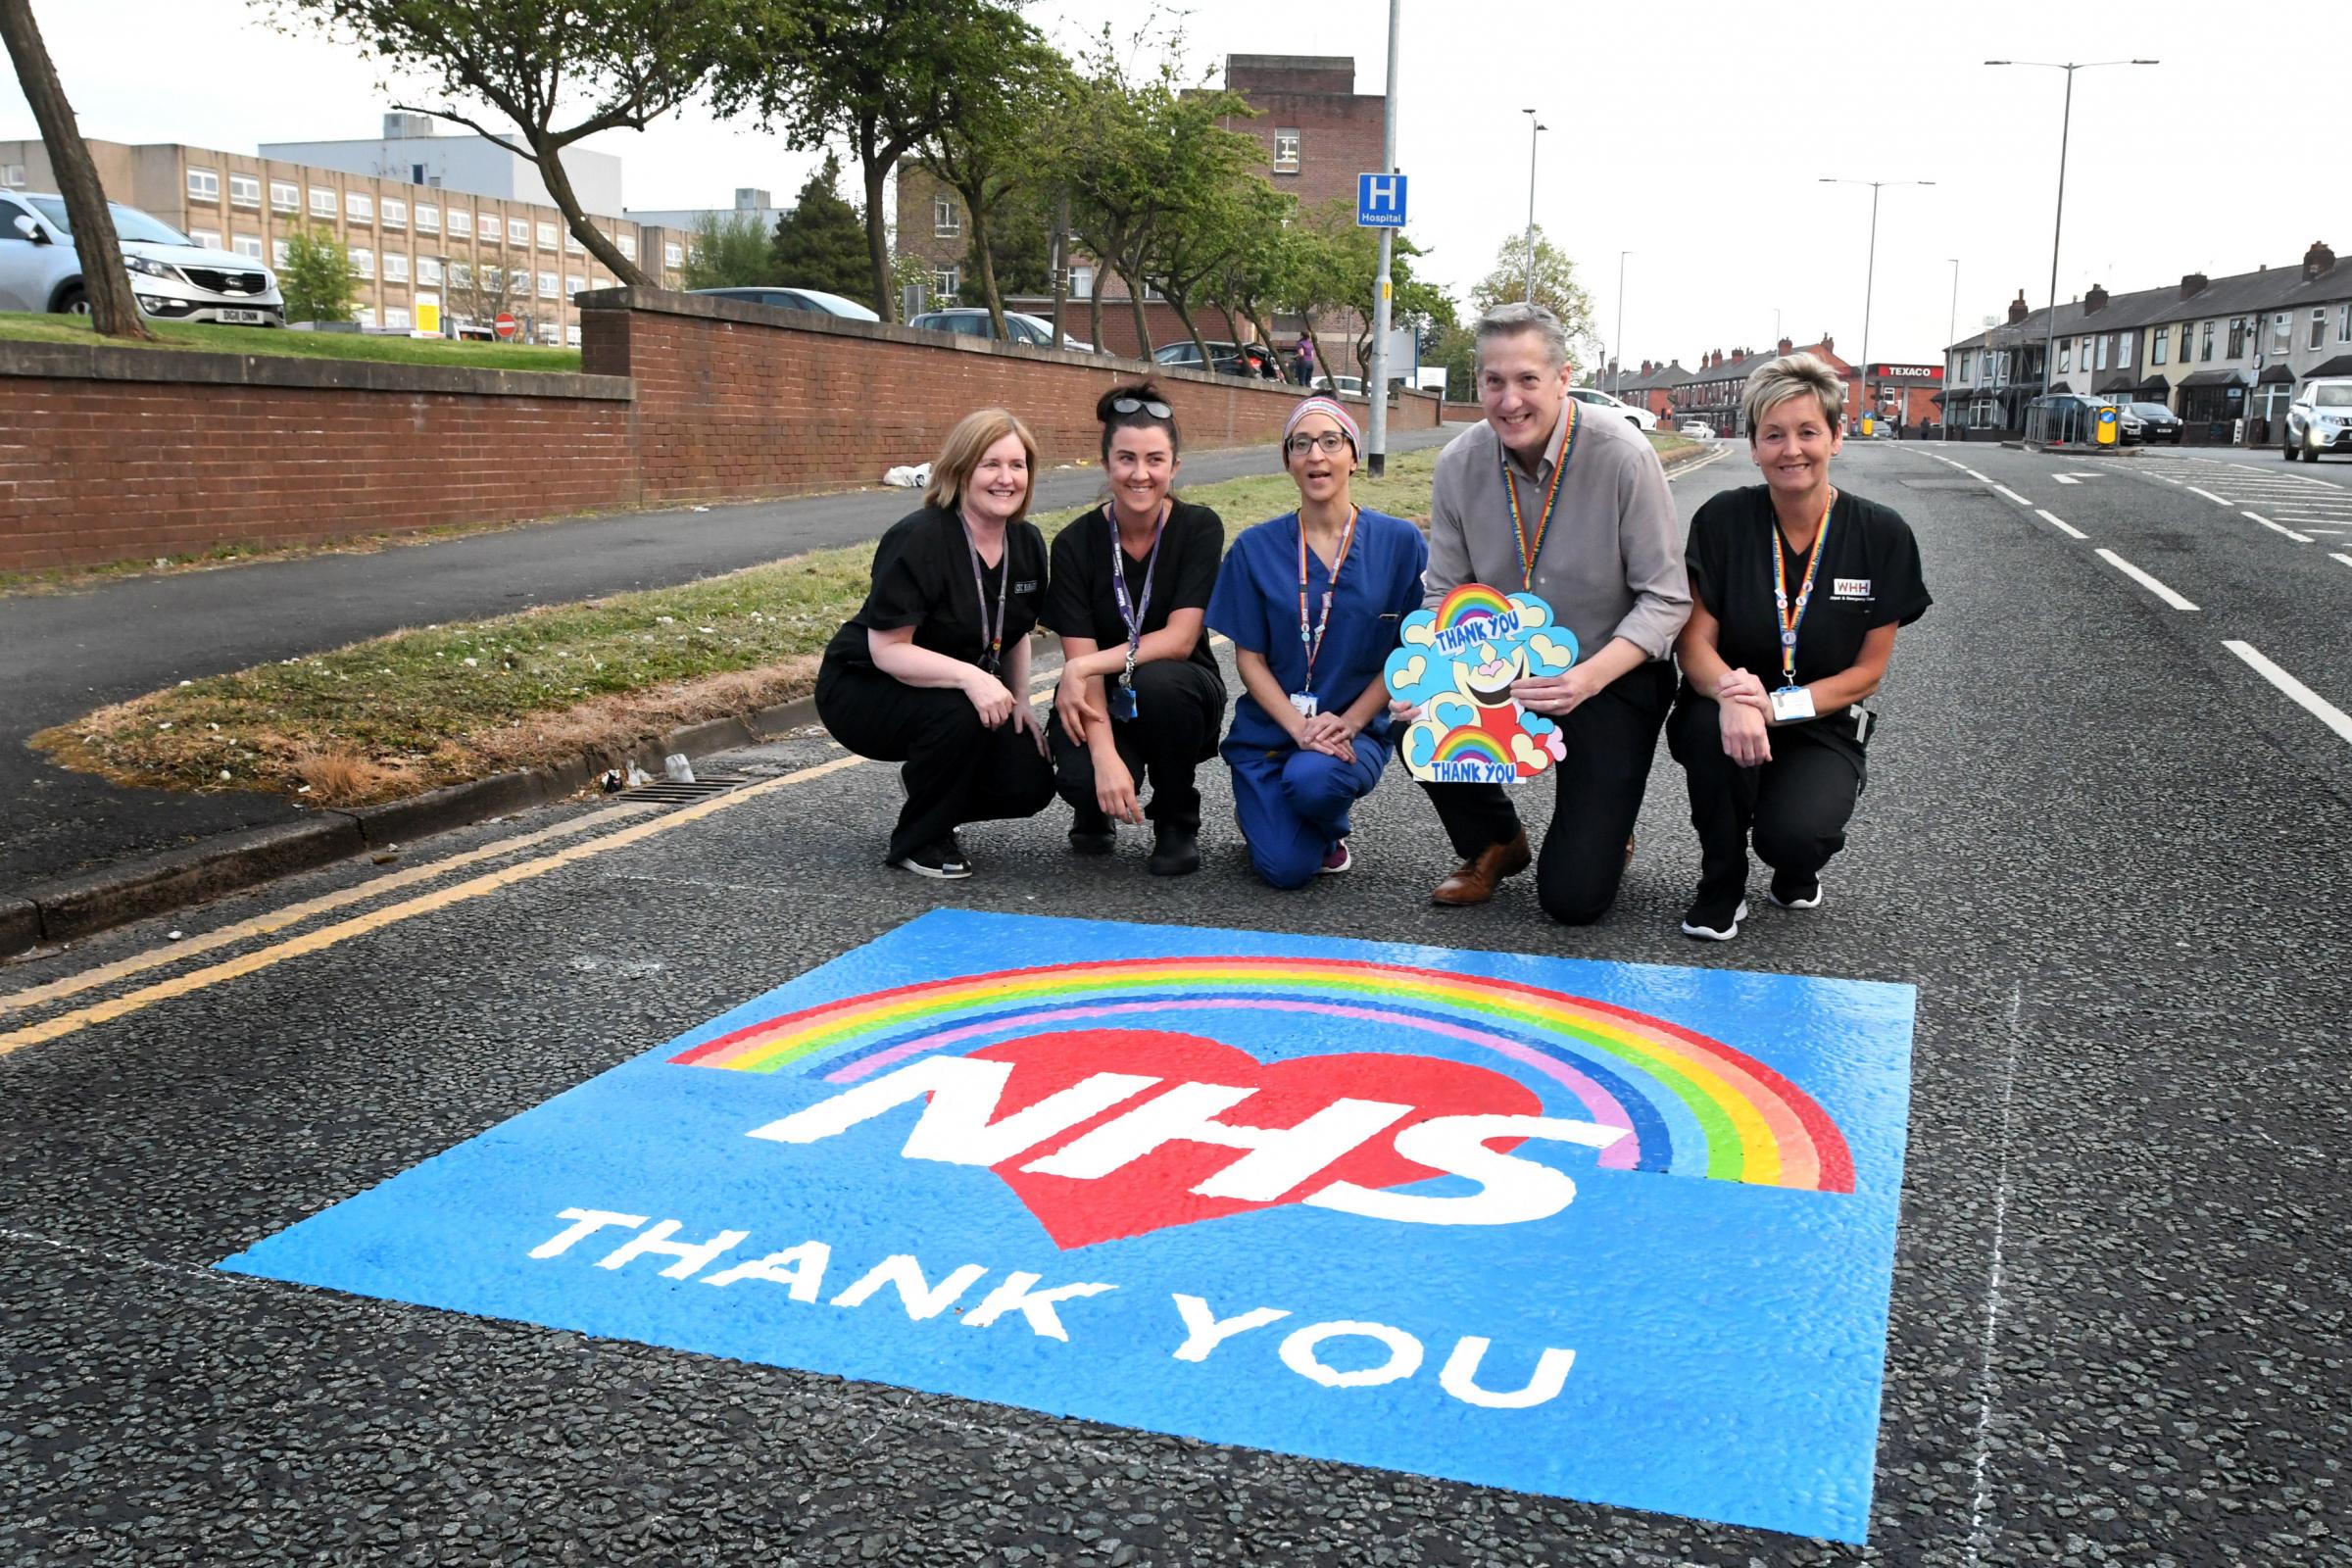 A road sign thanking NHS staff on Lovely Lane outside Warrington Hospital